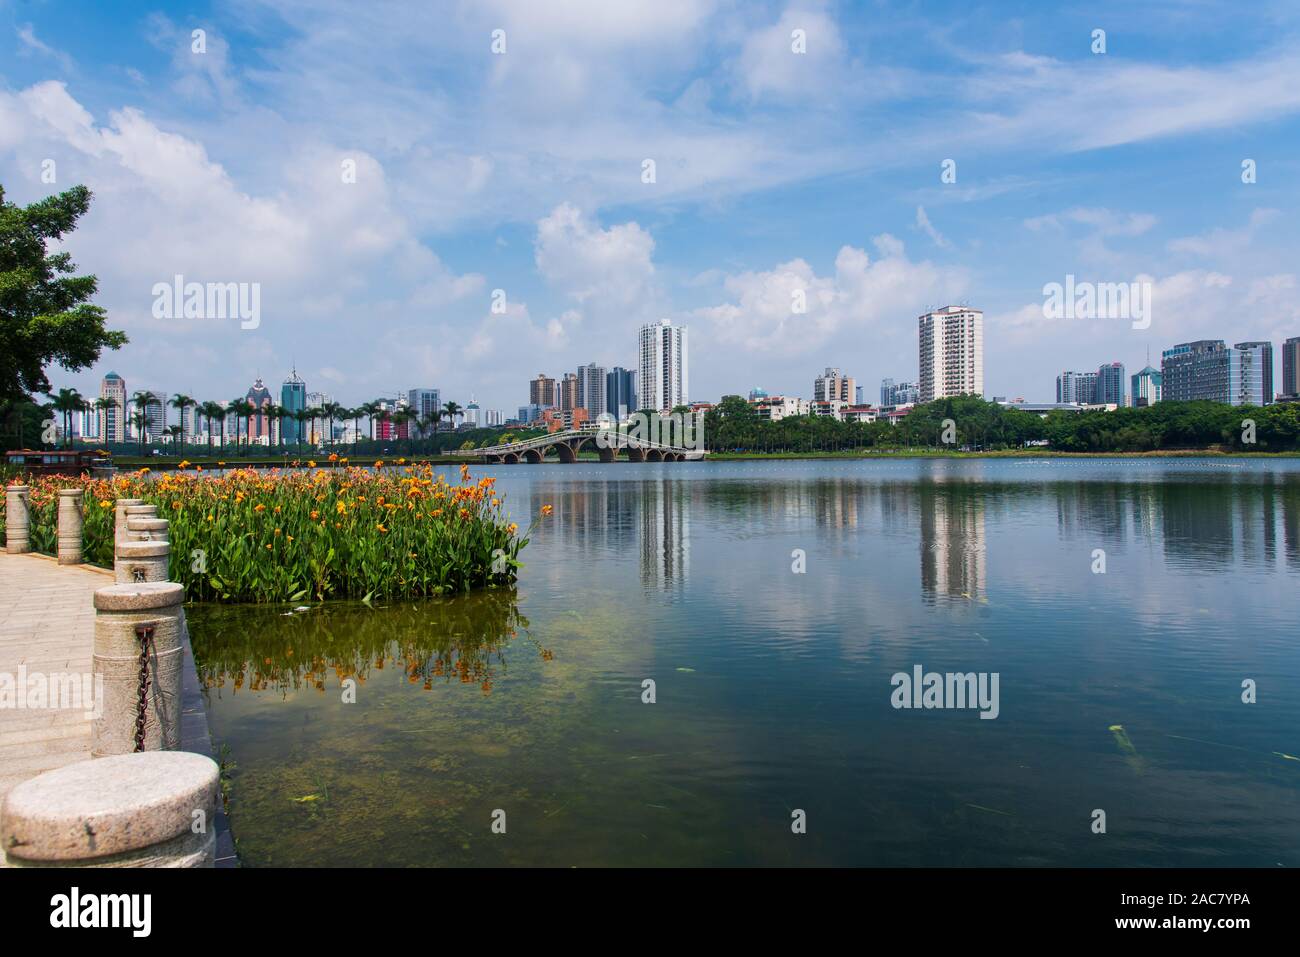 Nanhu South lake park in Nanning, capital of Guangxi province in China Stock Photo